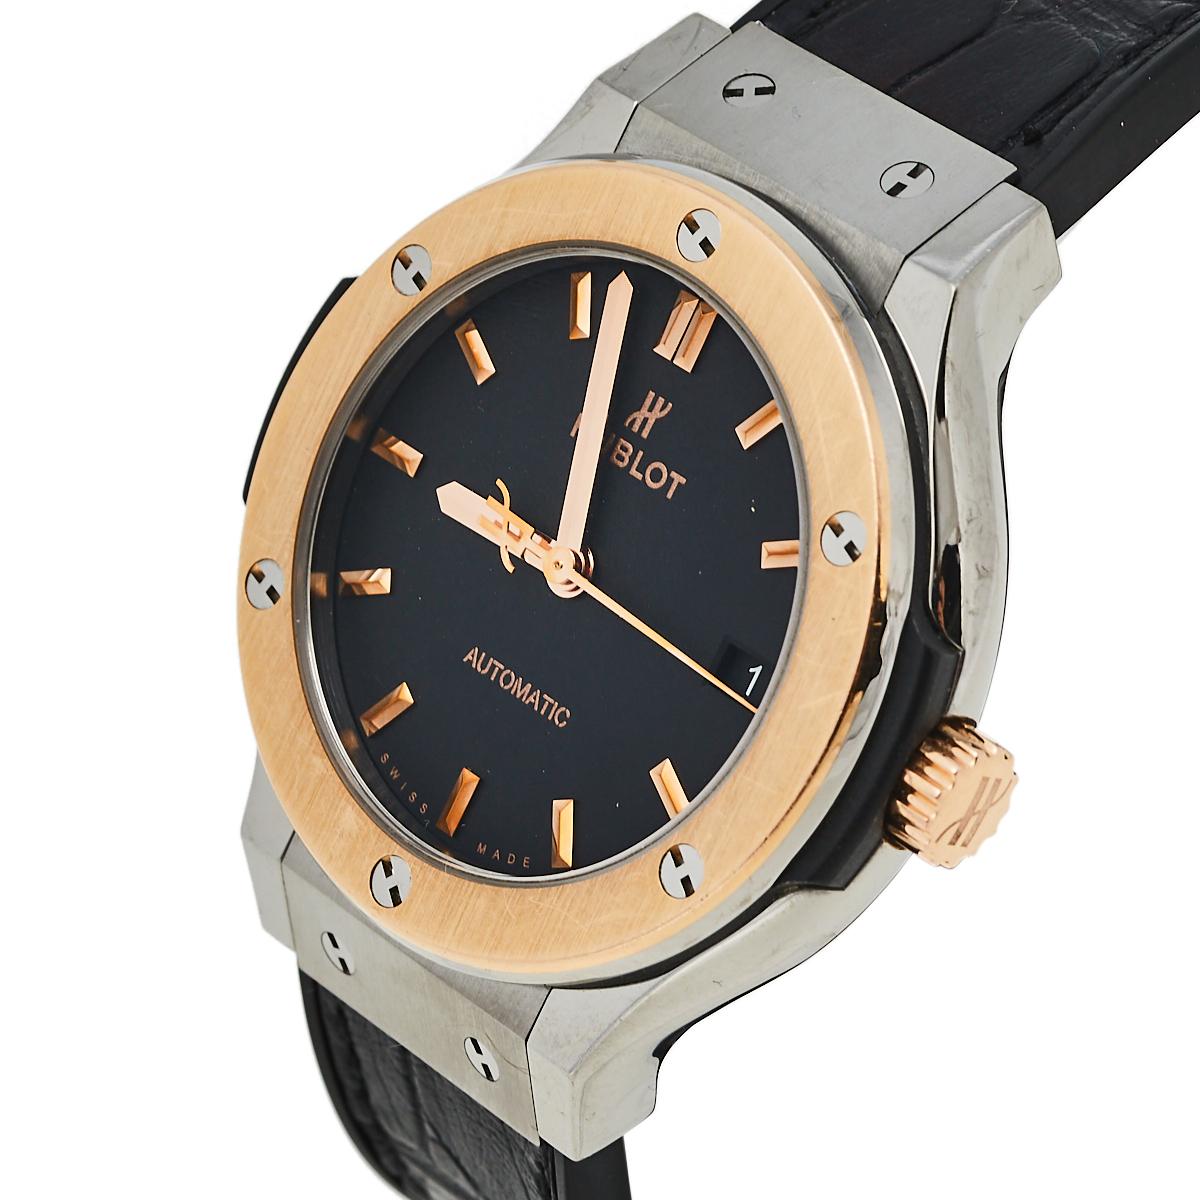 Not only is this stylish Hublot Classic Fusion wristwatch comfortable to wear, but it’s also well-crafted and attractive. The titanium case with an 18k rose gold bezel surrounding a black dial on a tonal leather strap looks elegantly timeless. Its